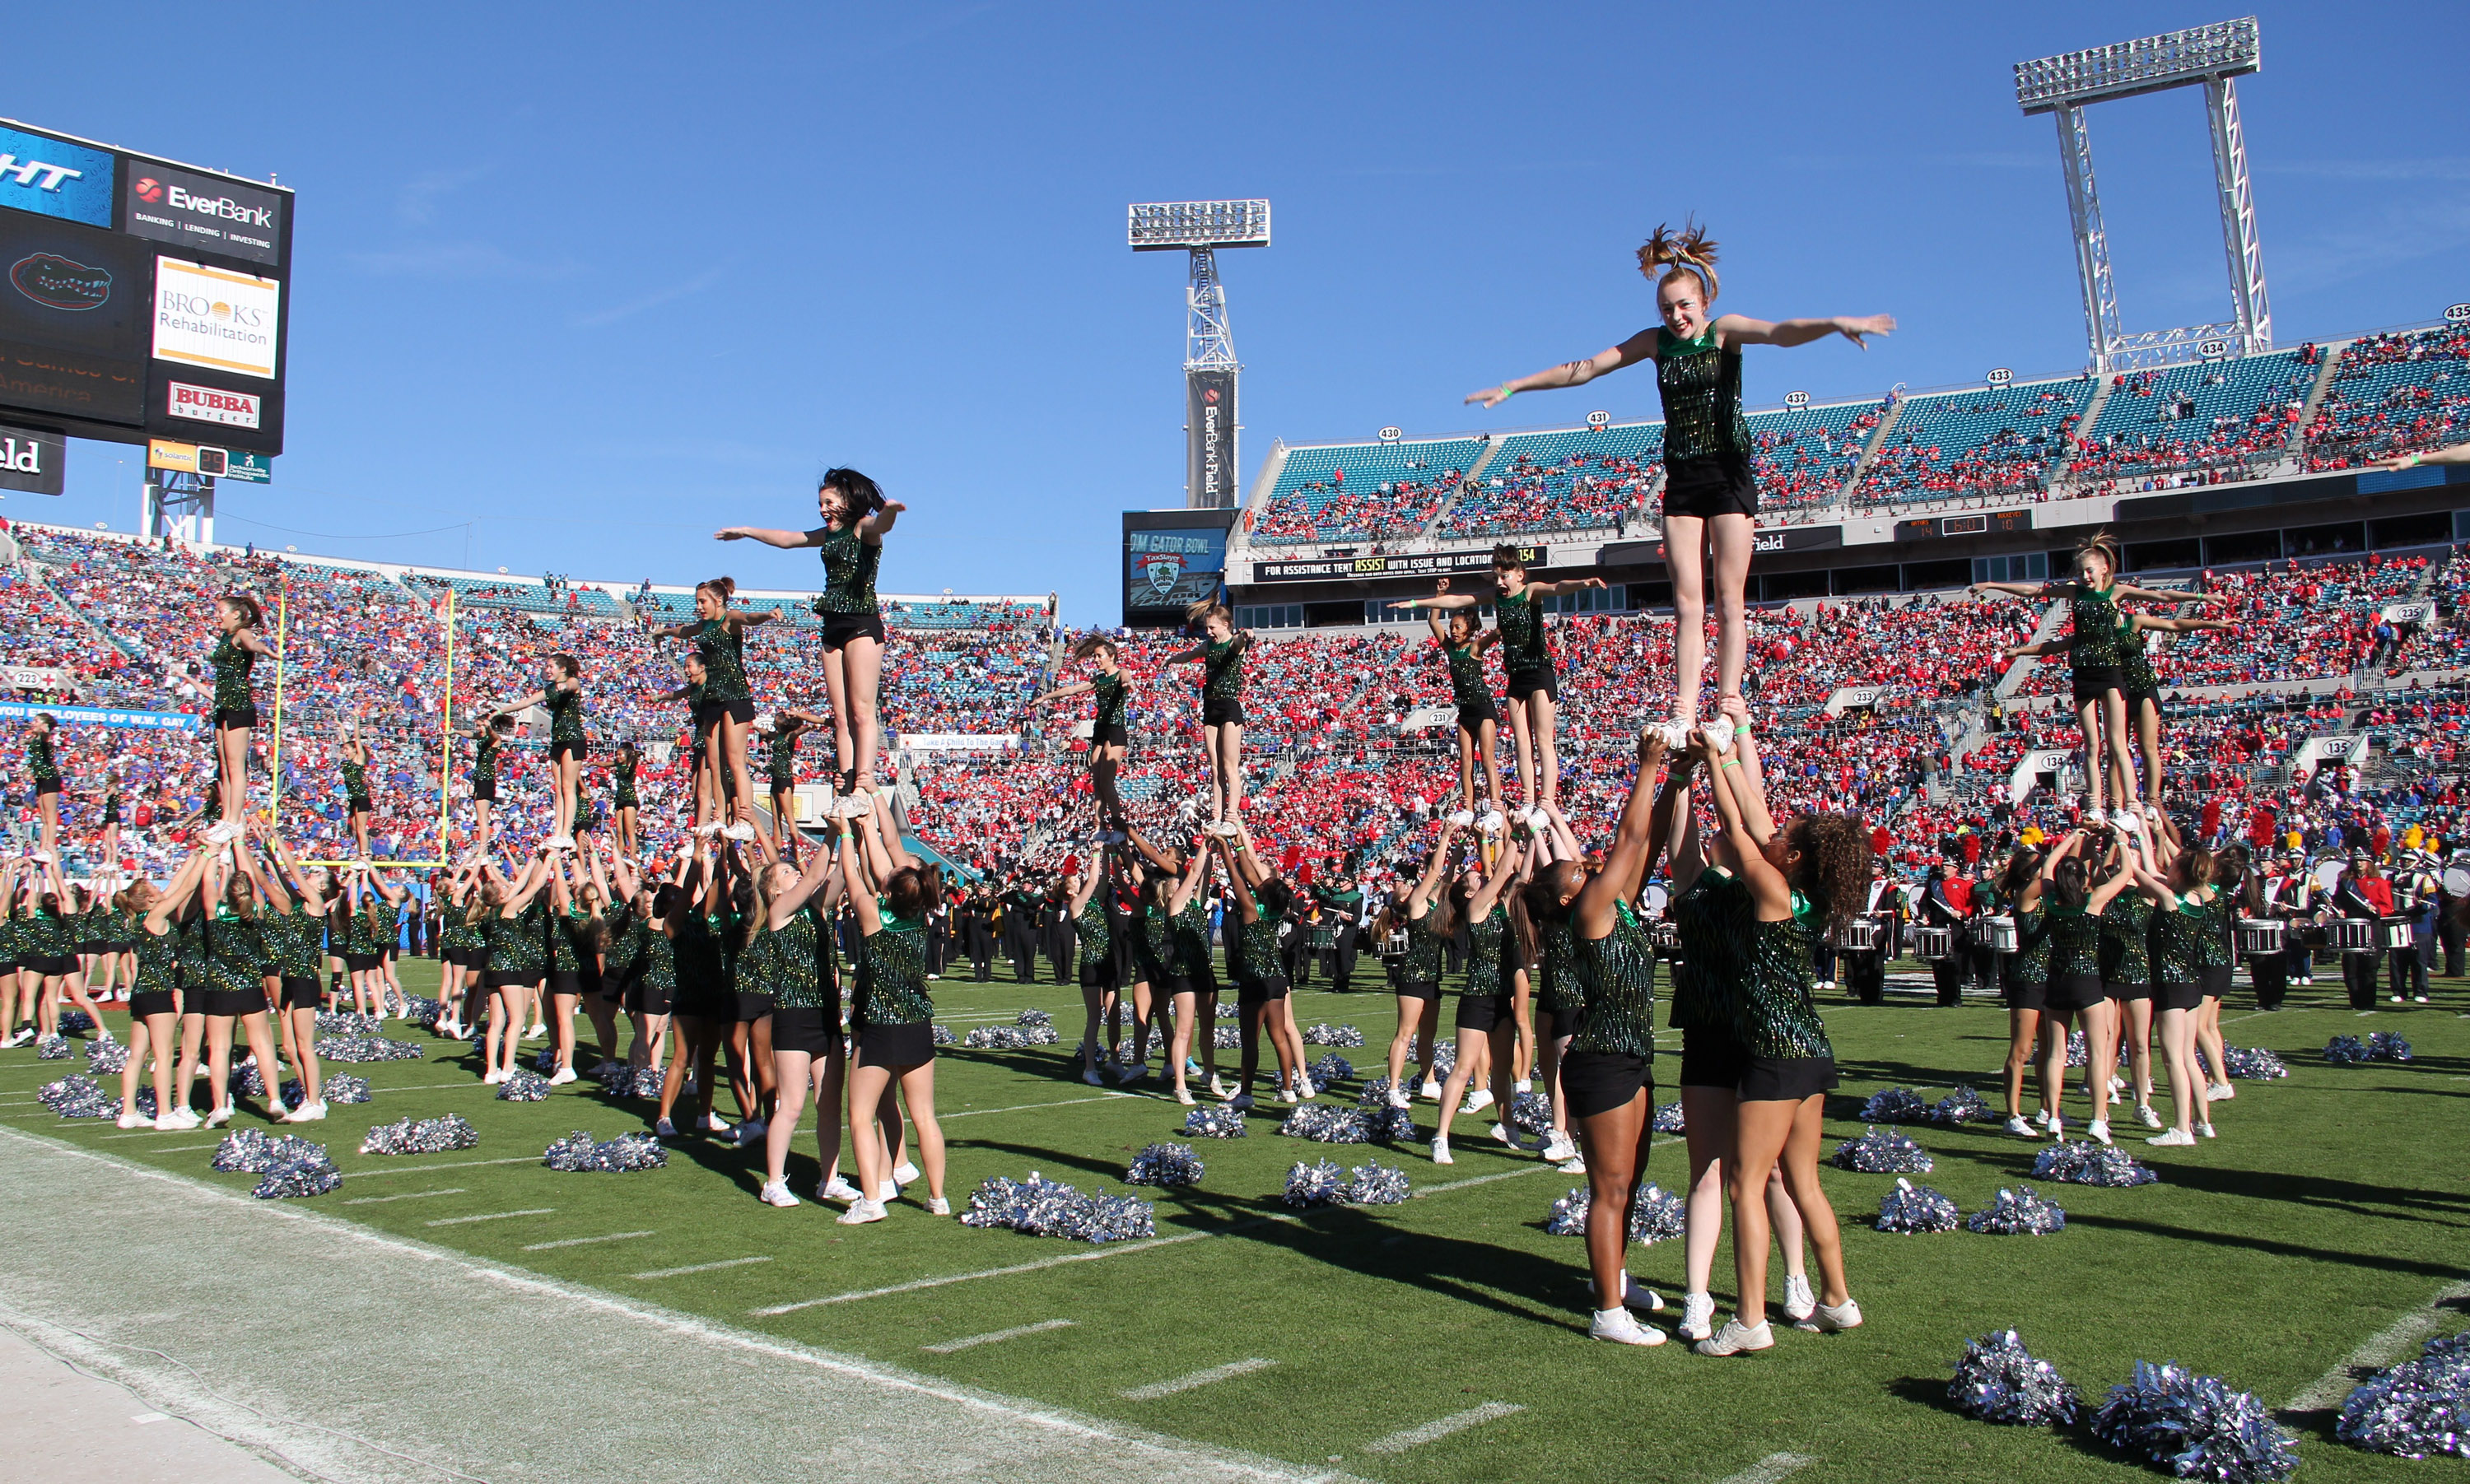 TaxSlayer Bowl Dance & Cheer Program Join WorldStrides OnStage programs in sunny Jacksonville, Florida to perform in the TaxSlayer Bowl Halftime Show and Downtown TaxSlayer Bowl Parade! Instead of choosing between attending a cheer camp or convention and performing on a big stage, why not get it all? The TaxSlayer Bowl offers your cheer team an opportunity unlike any other. The game itself averages more than 70,000 fans in attendance. Squads of all levels and size are invited; take advantage of world-class cheer education and grow your program with the performance experience of a lifetime! This event is open to performers aged 7-19.